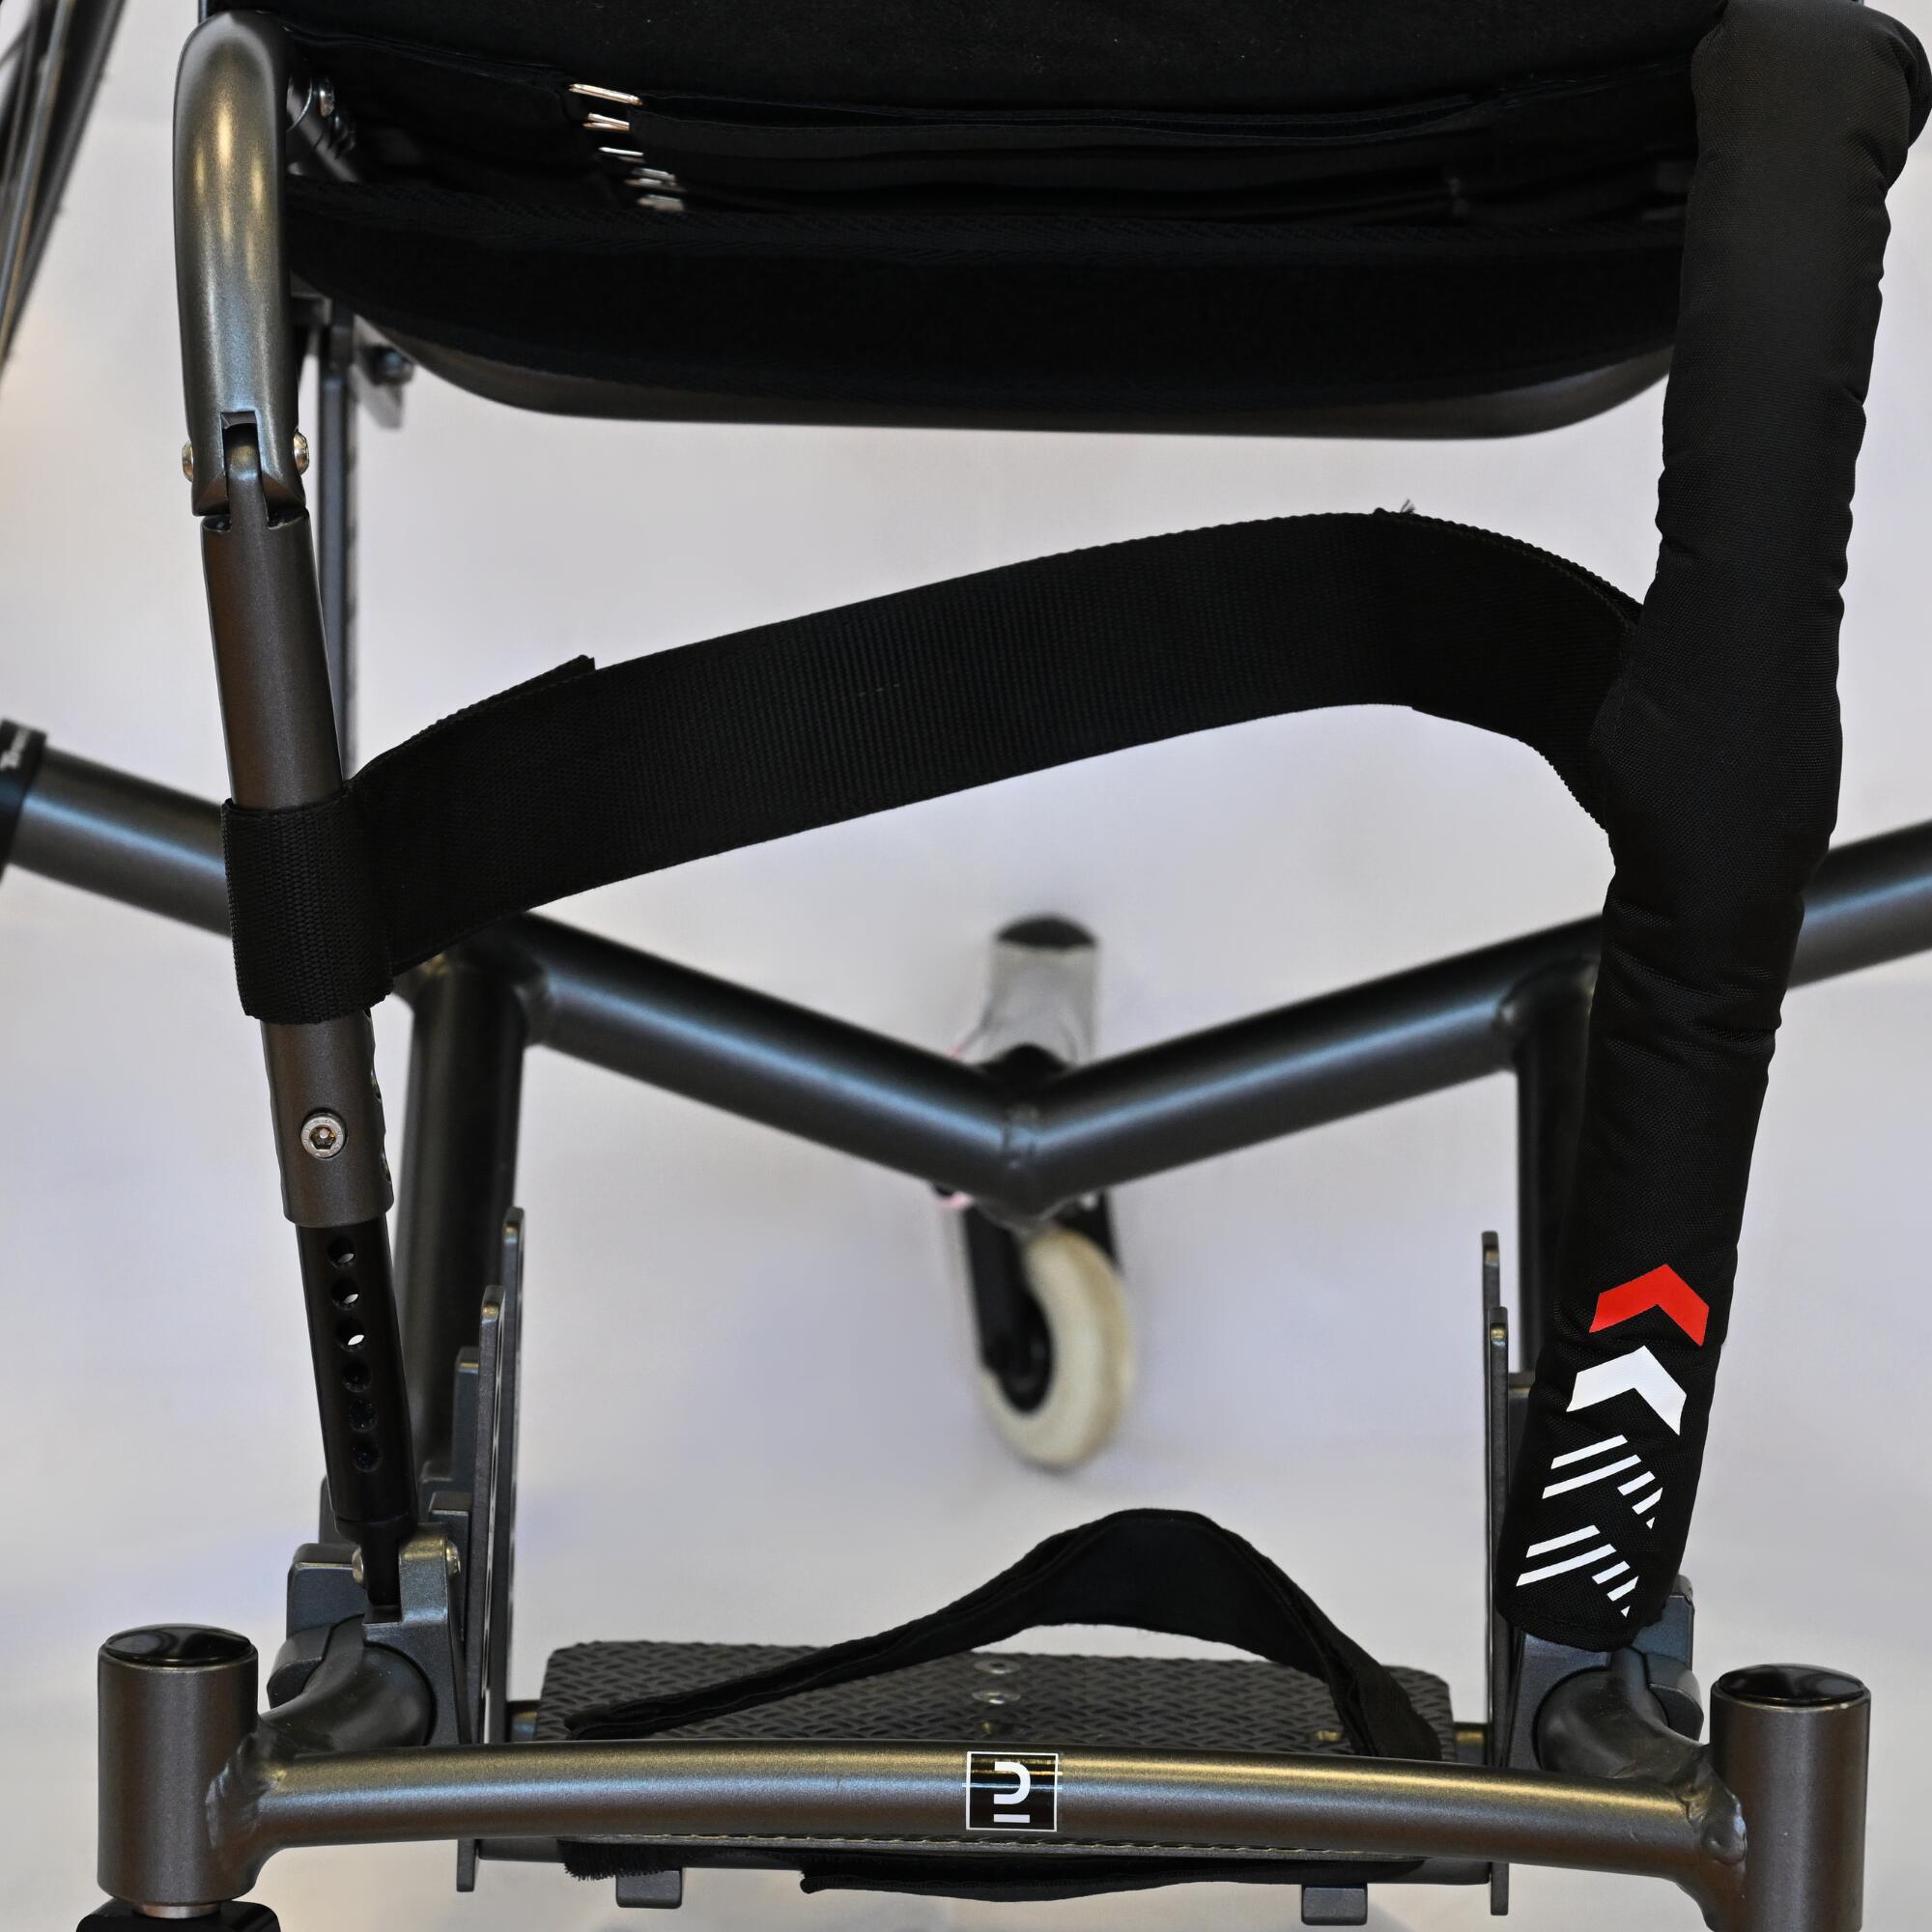 Tennis and Racket Sports Adjustable Wheelchair TW500 7/7